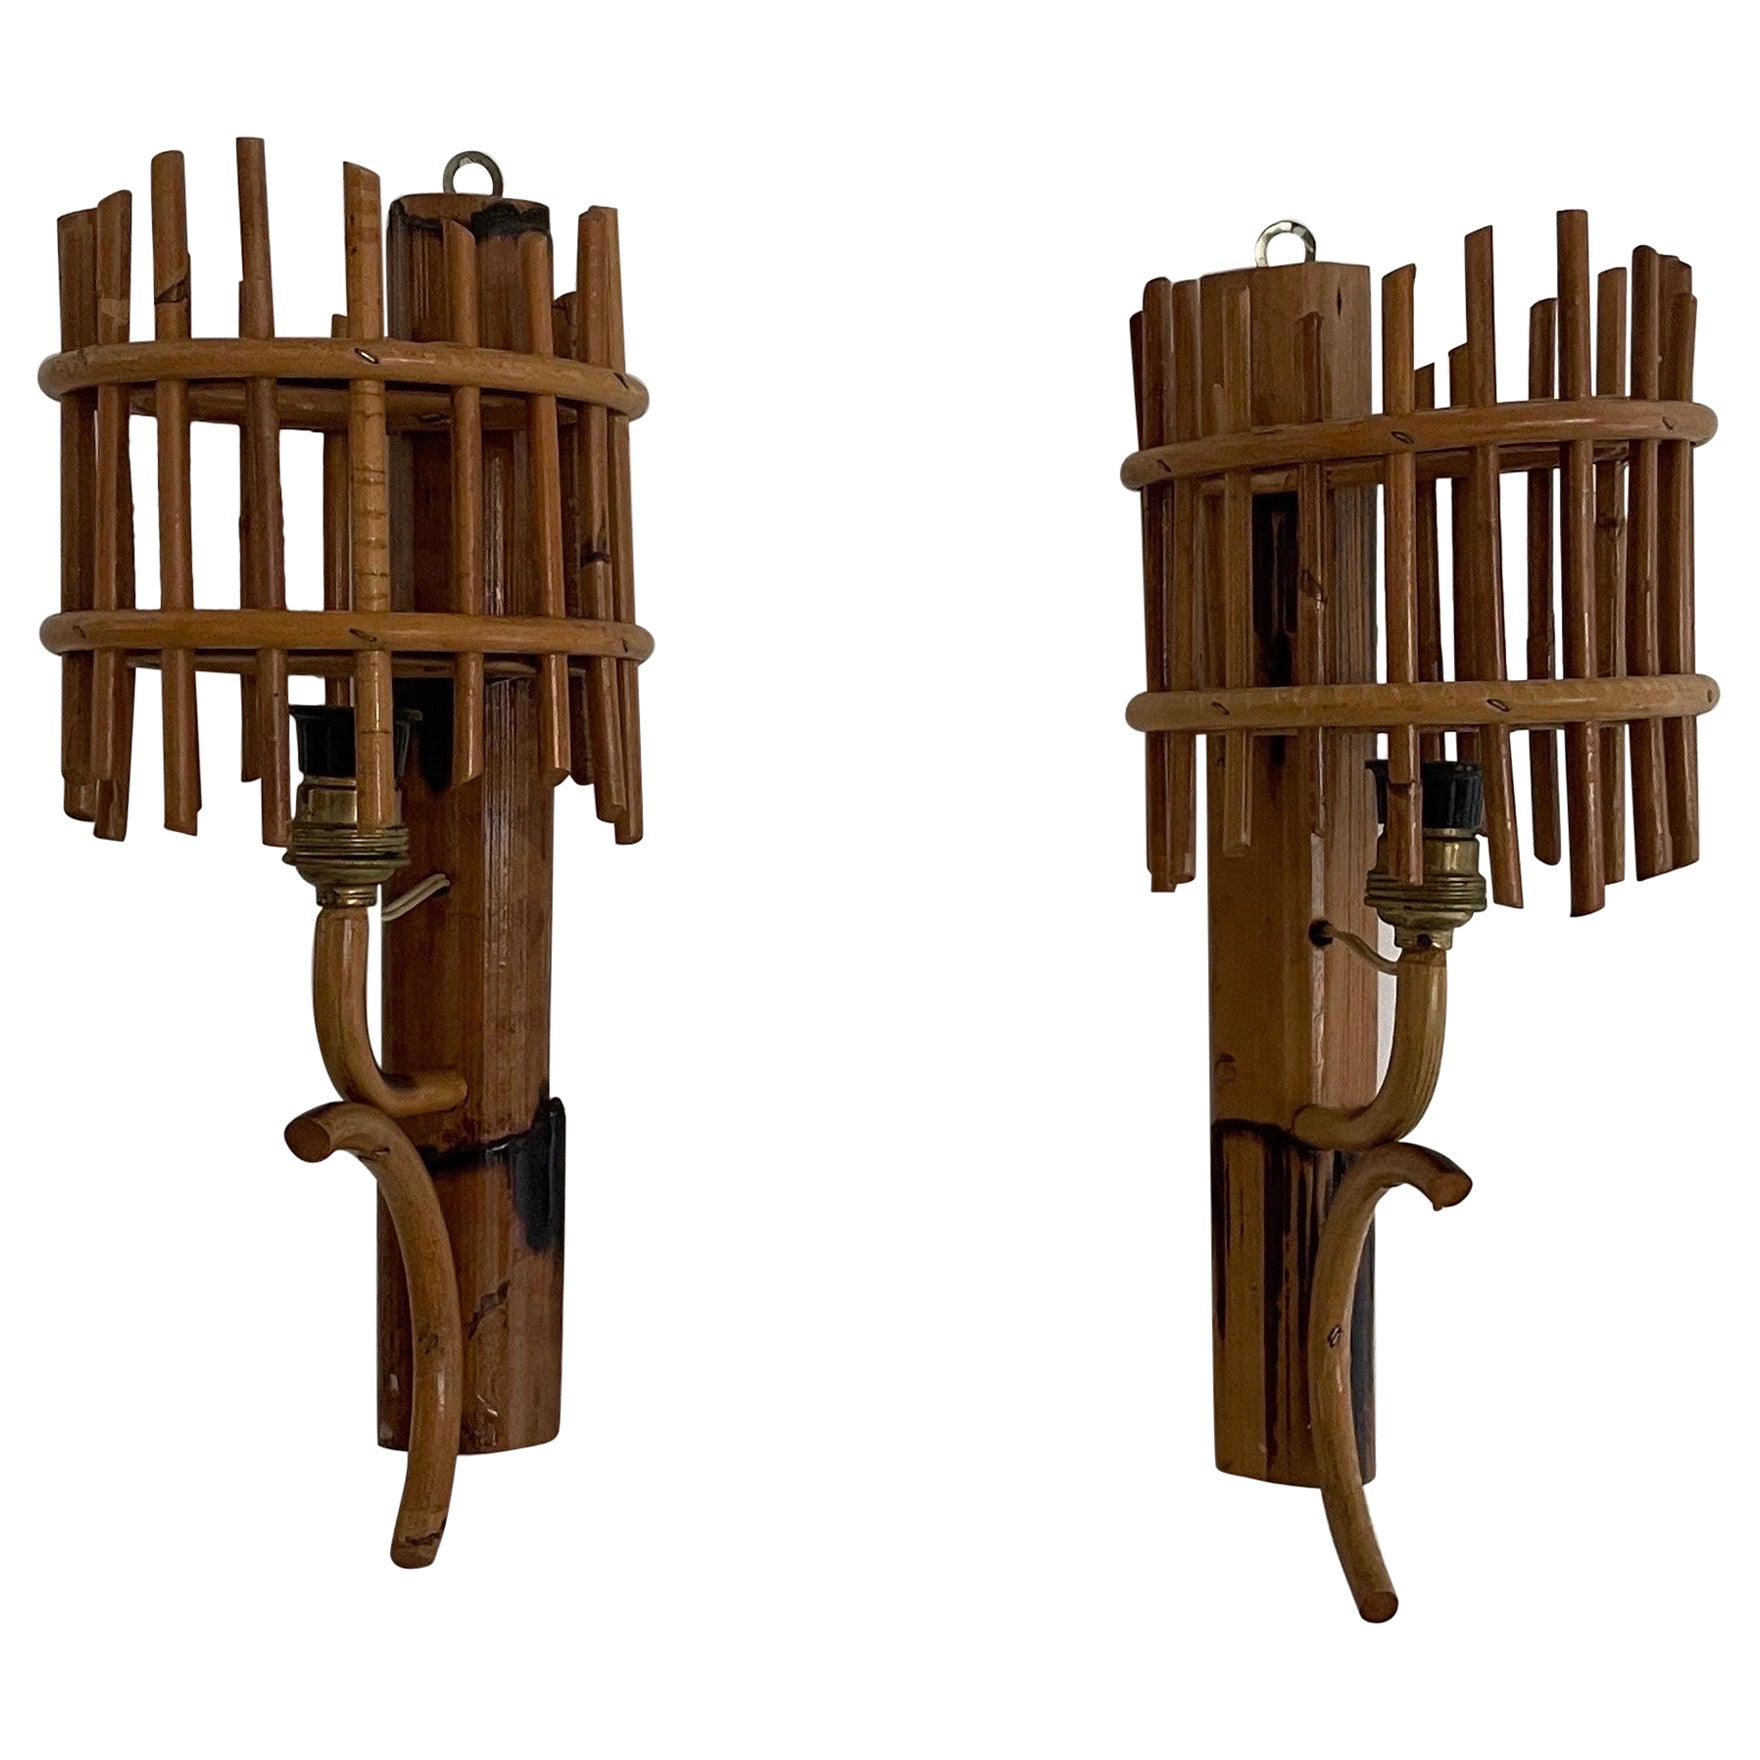 Mid-Century Modern Bamboo Pair of Wall Lamps, 1950s, Italy